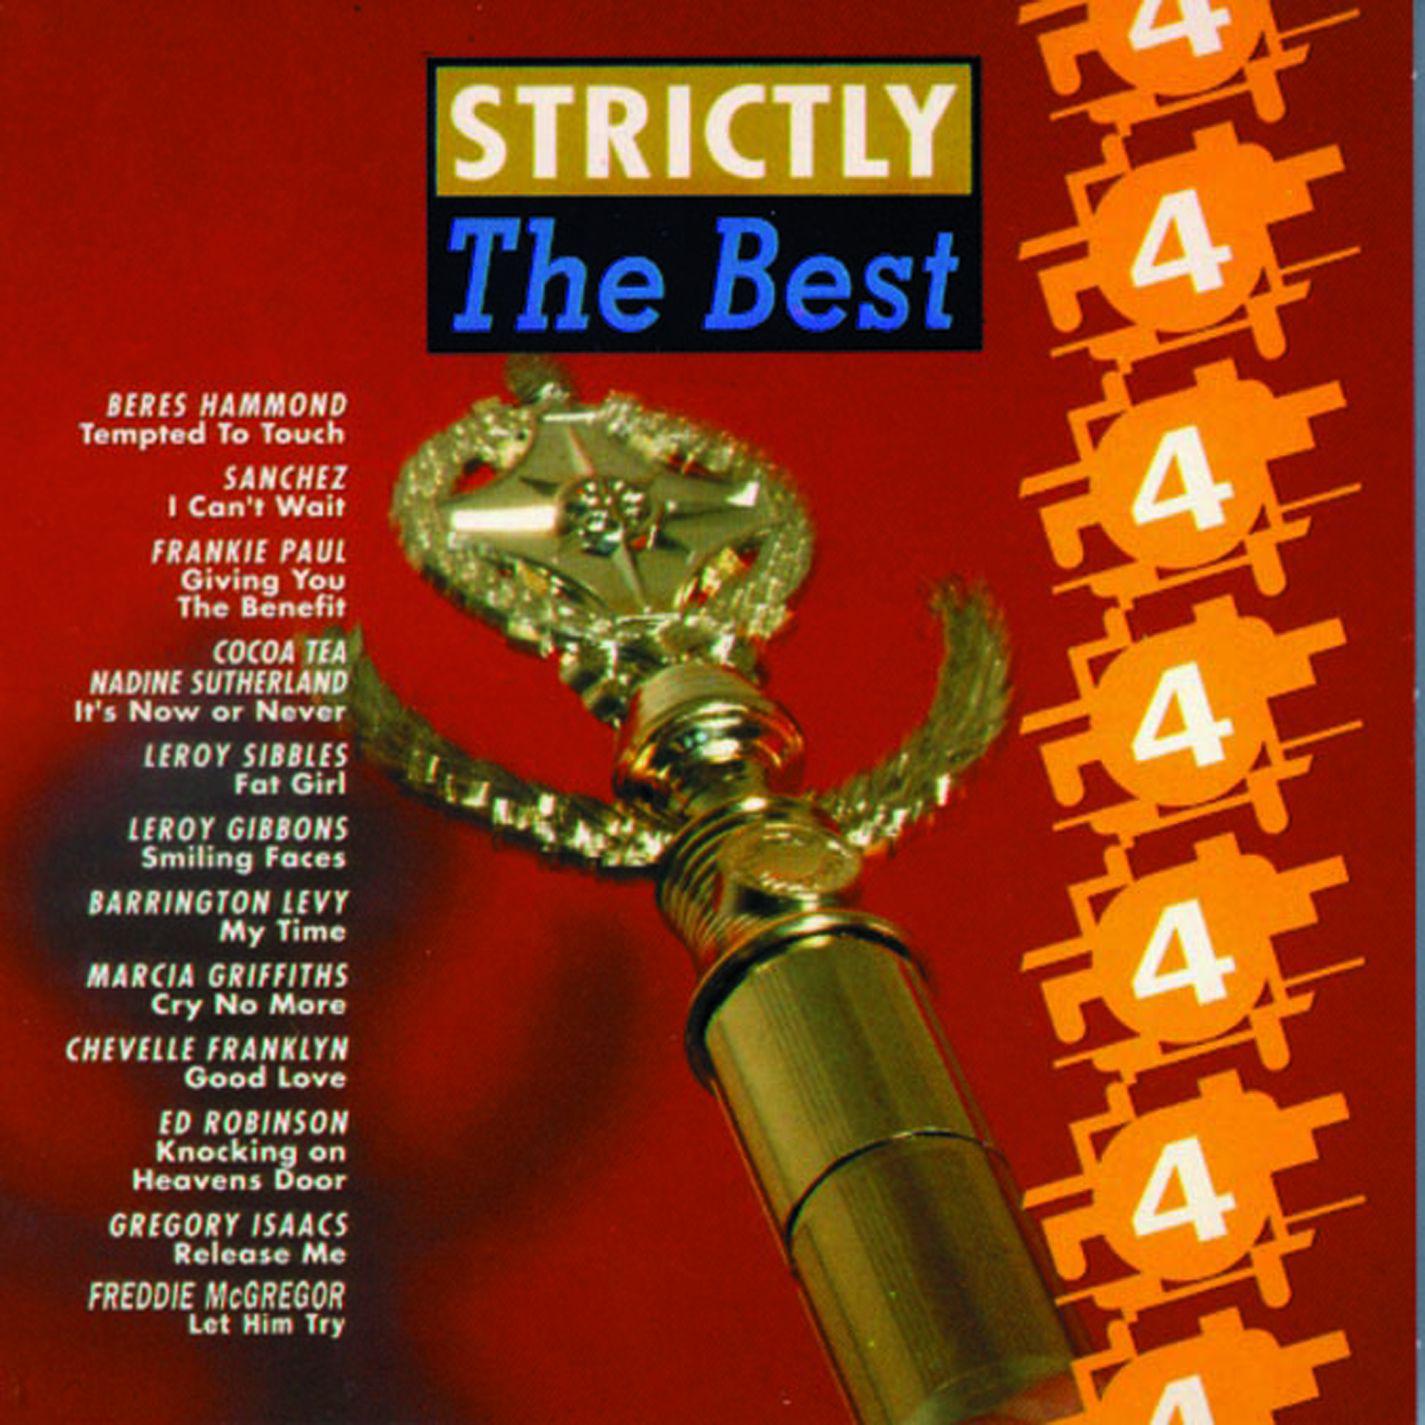 Strictly The Best Vol. 4